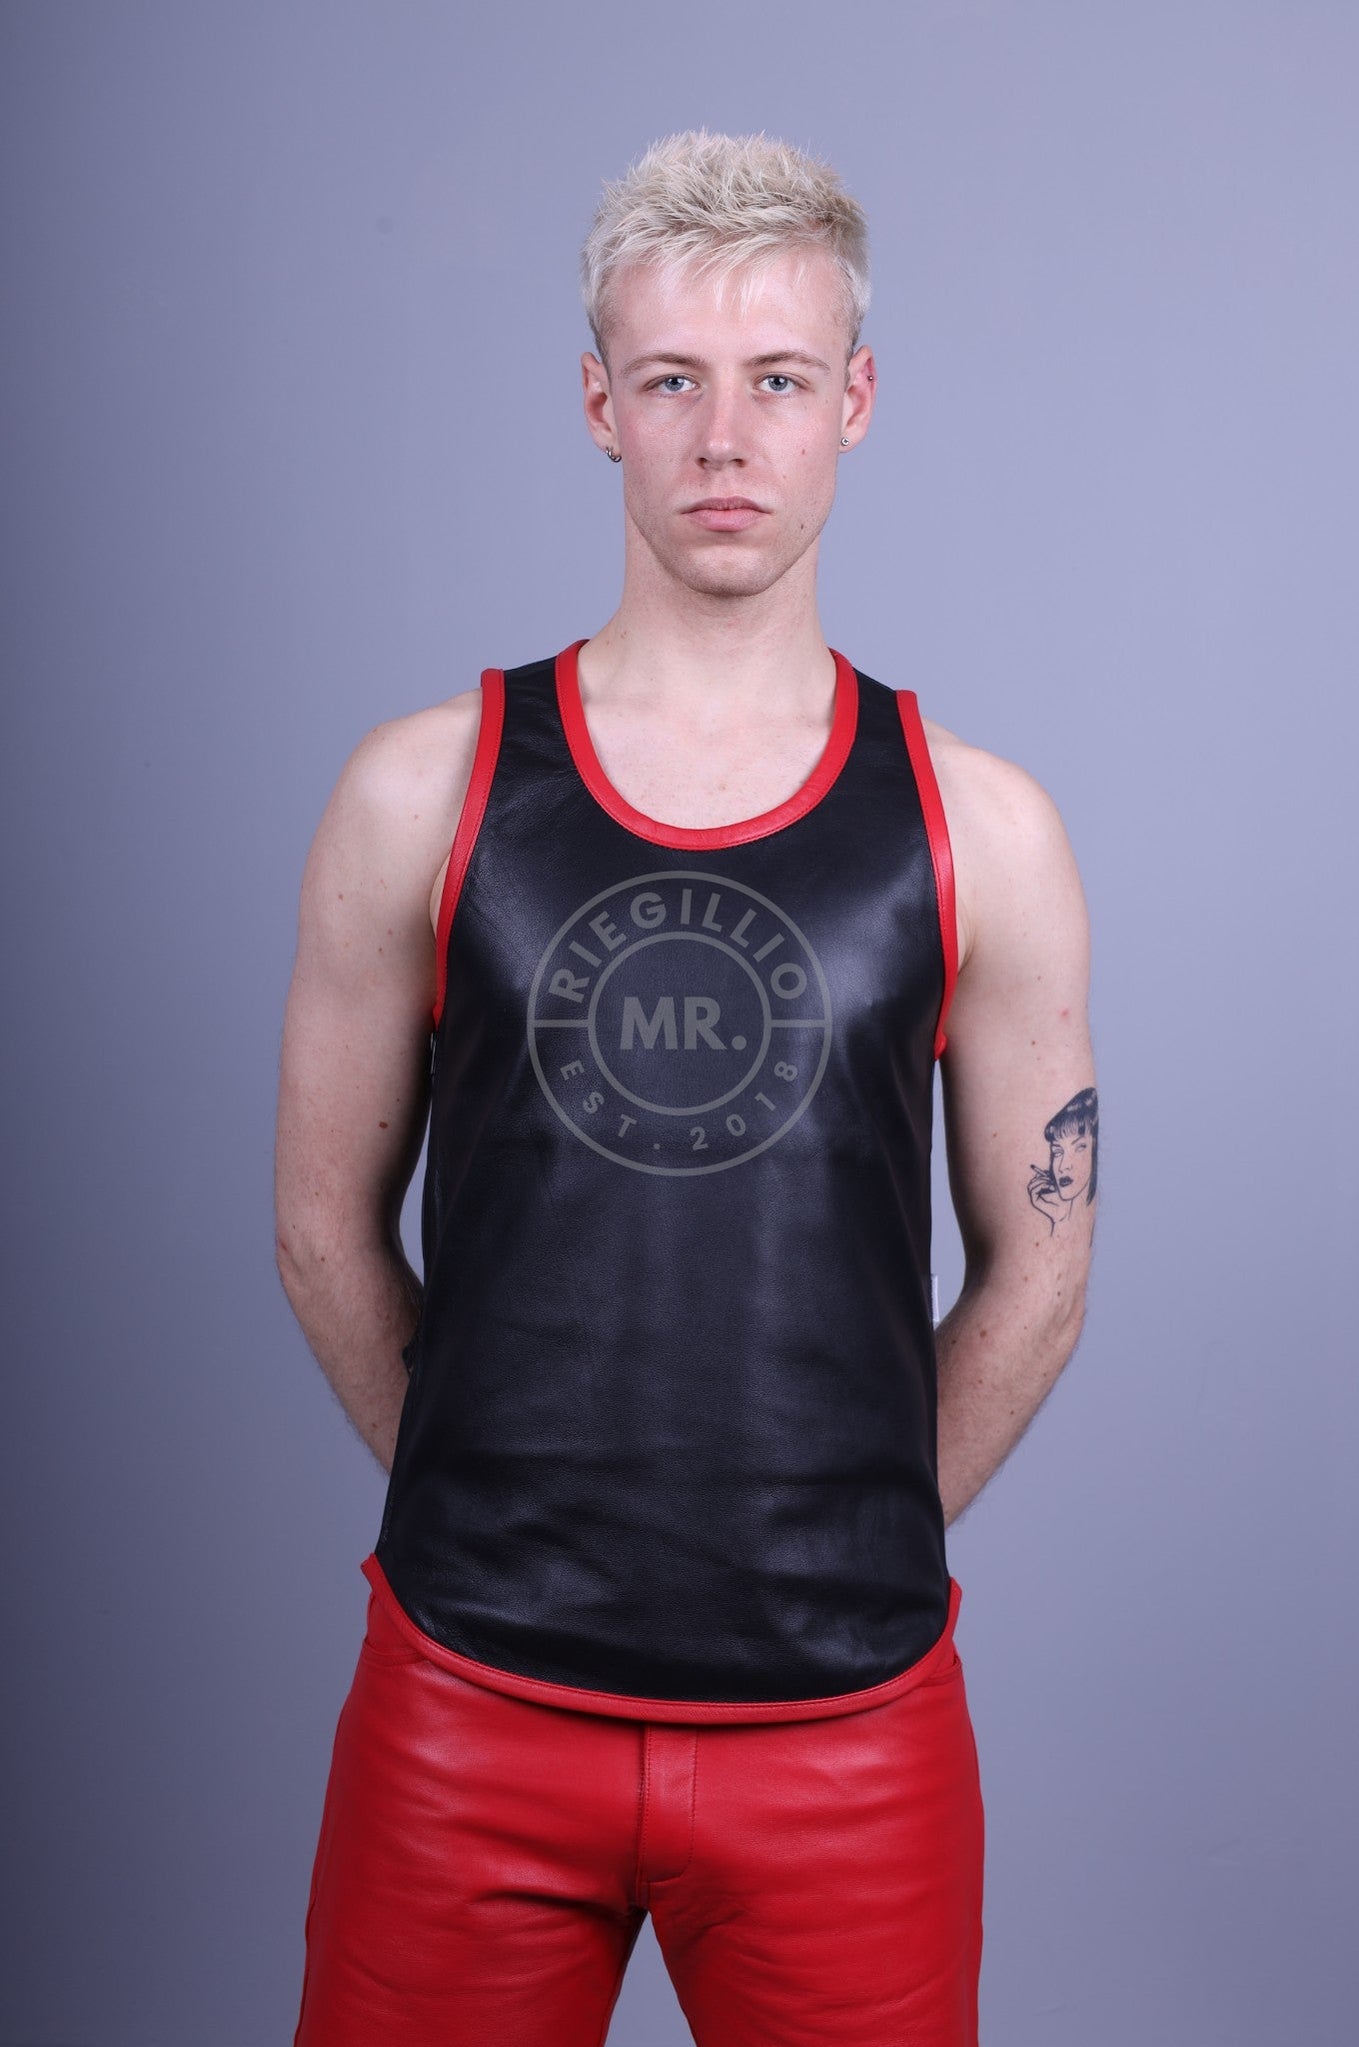 Leather Tank Top - Red Piping at MR. Riegillio